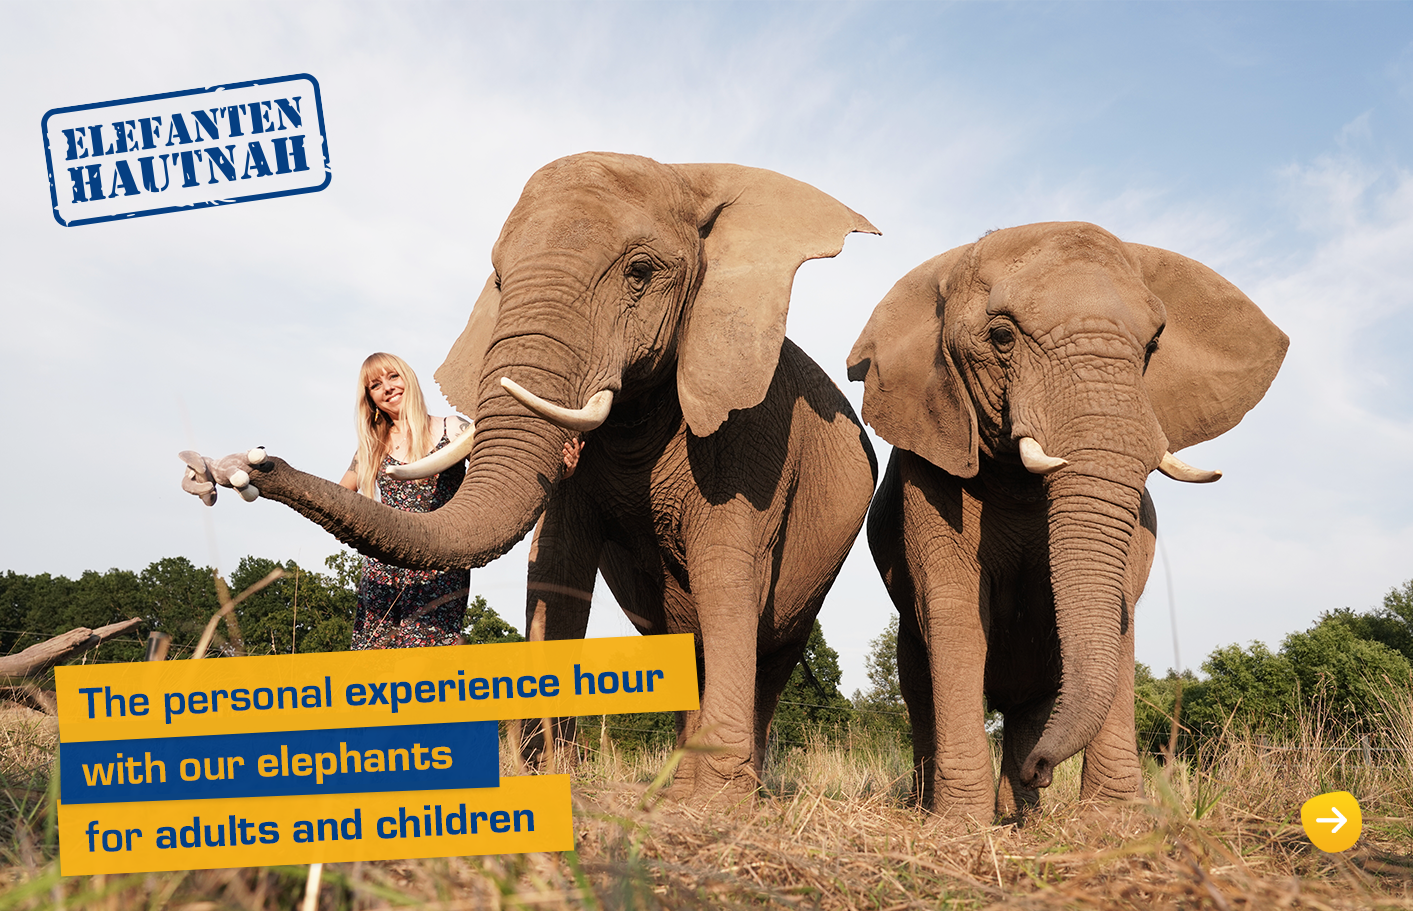 The personal experience hour with our elephants for adults and children